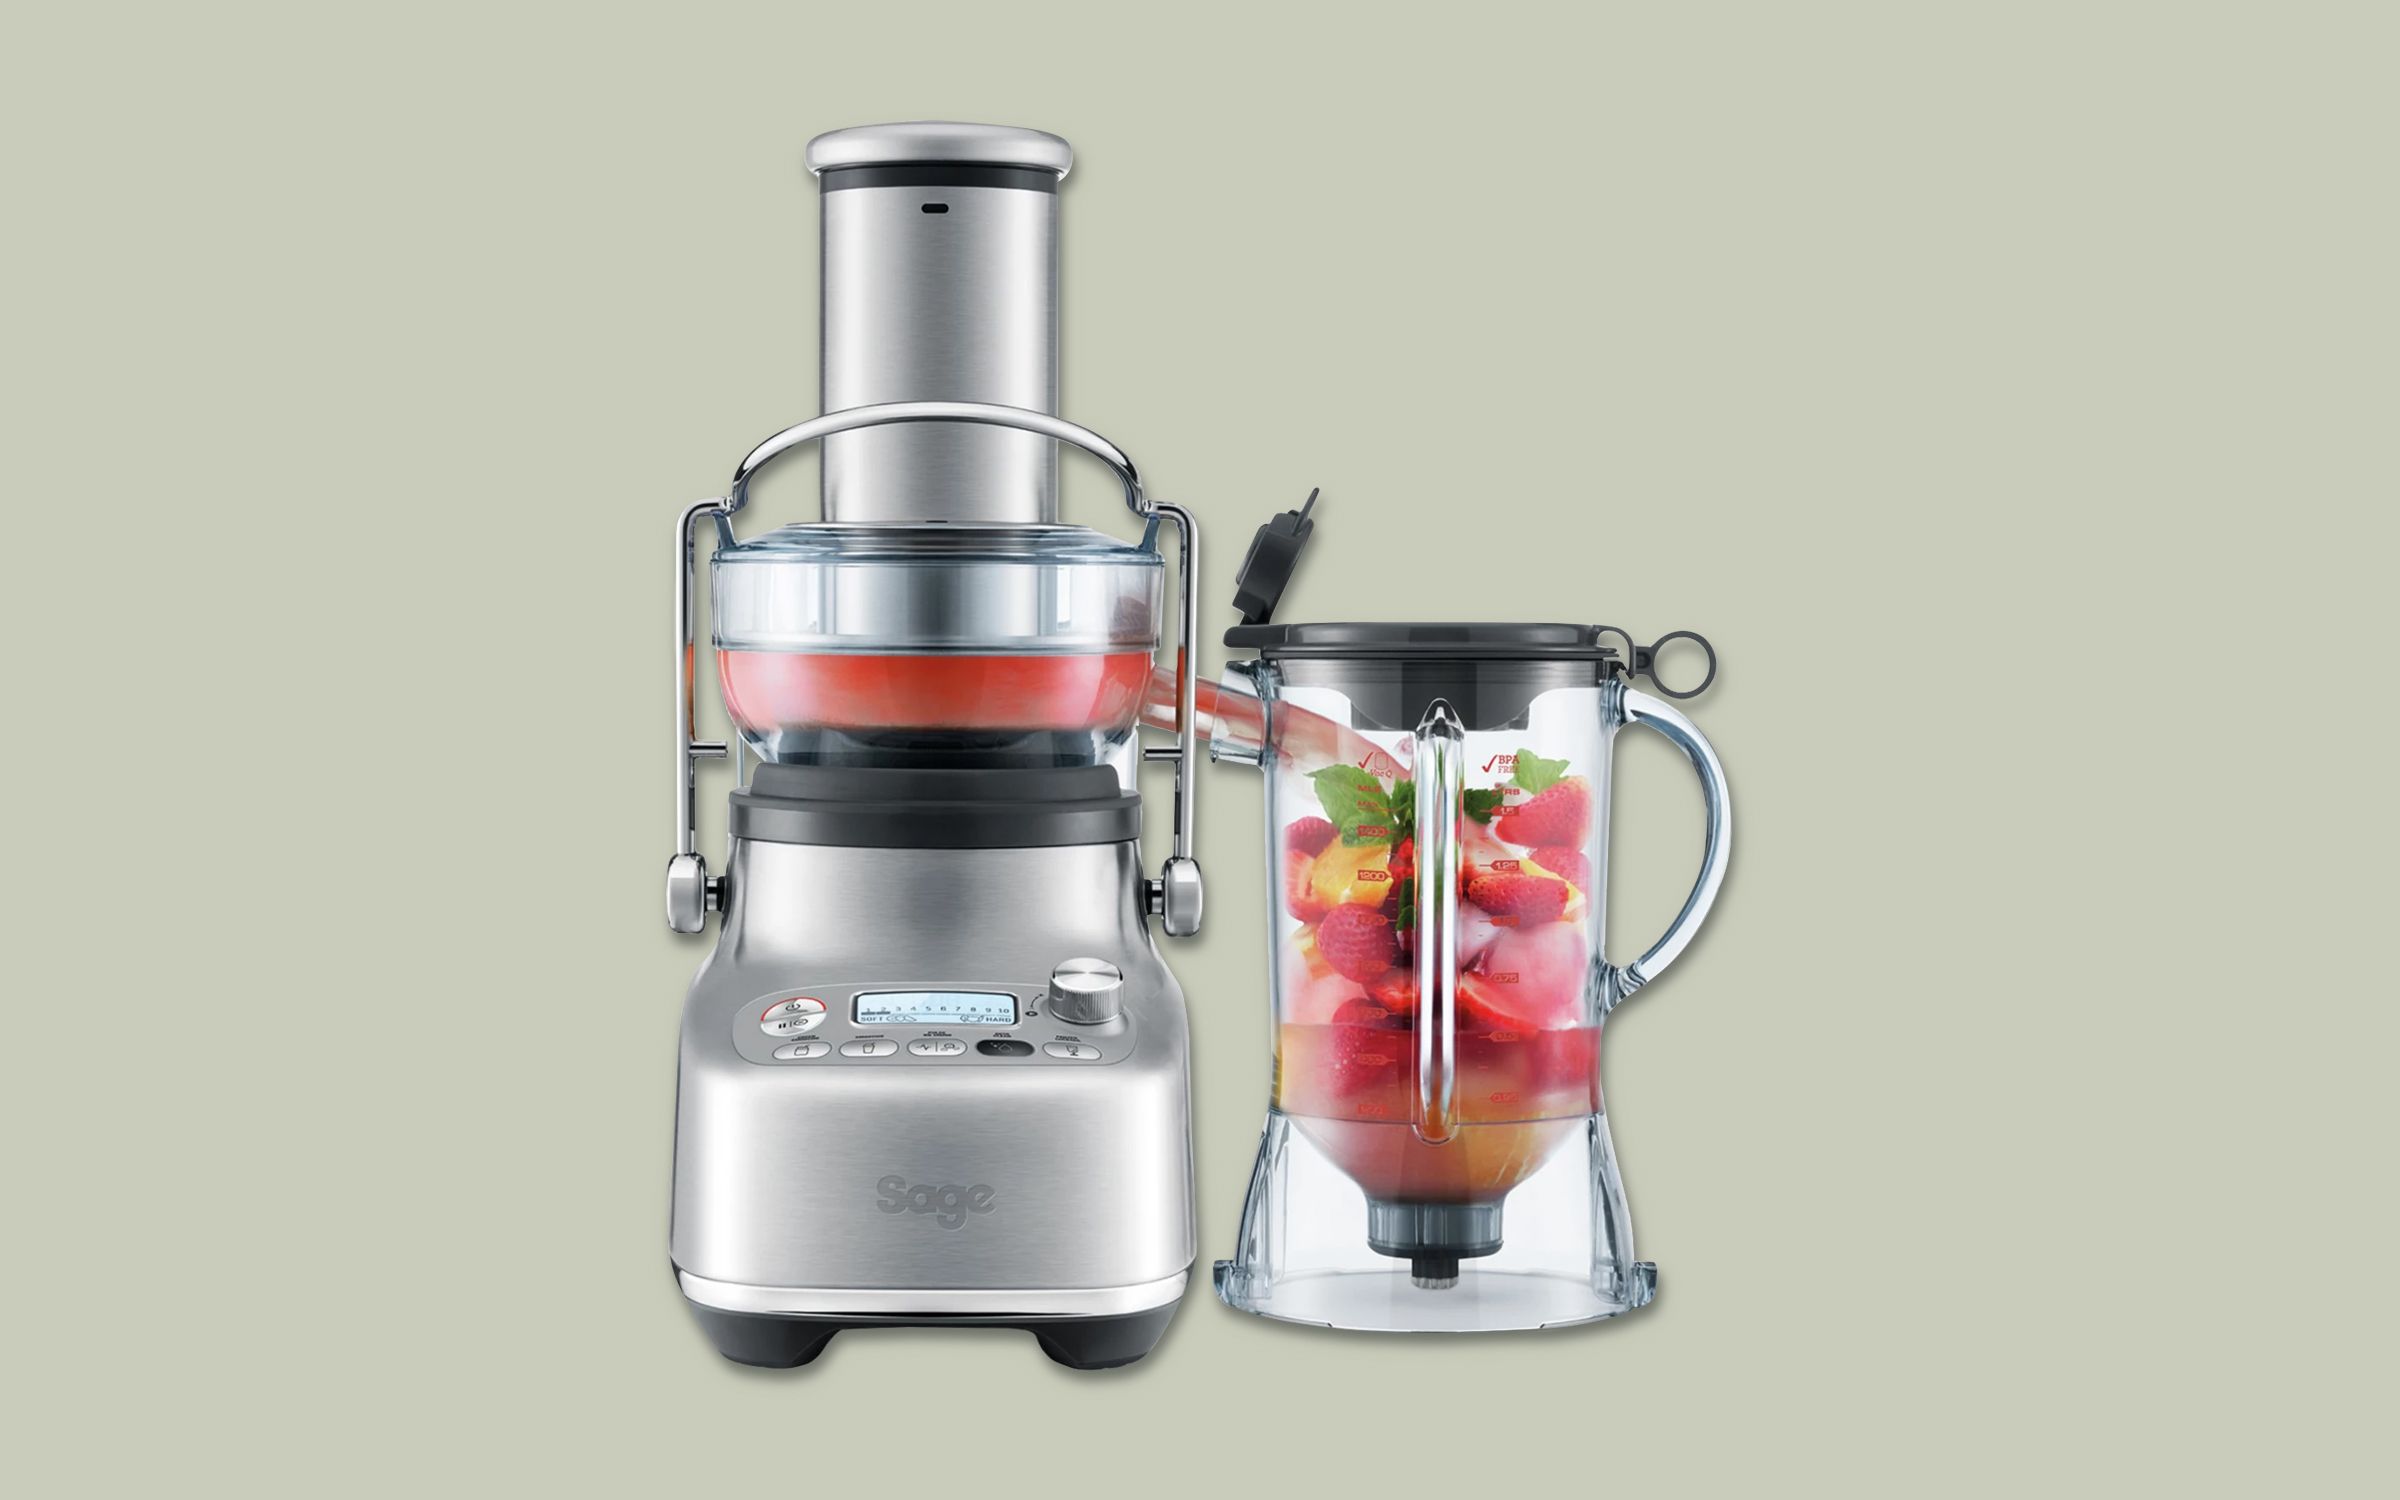 Sage SJB815BSS the 3X Bluicer™ Juicer